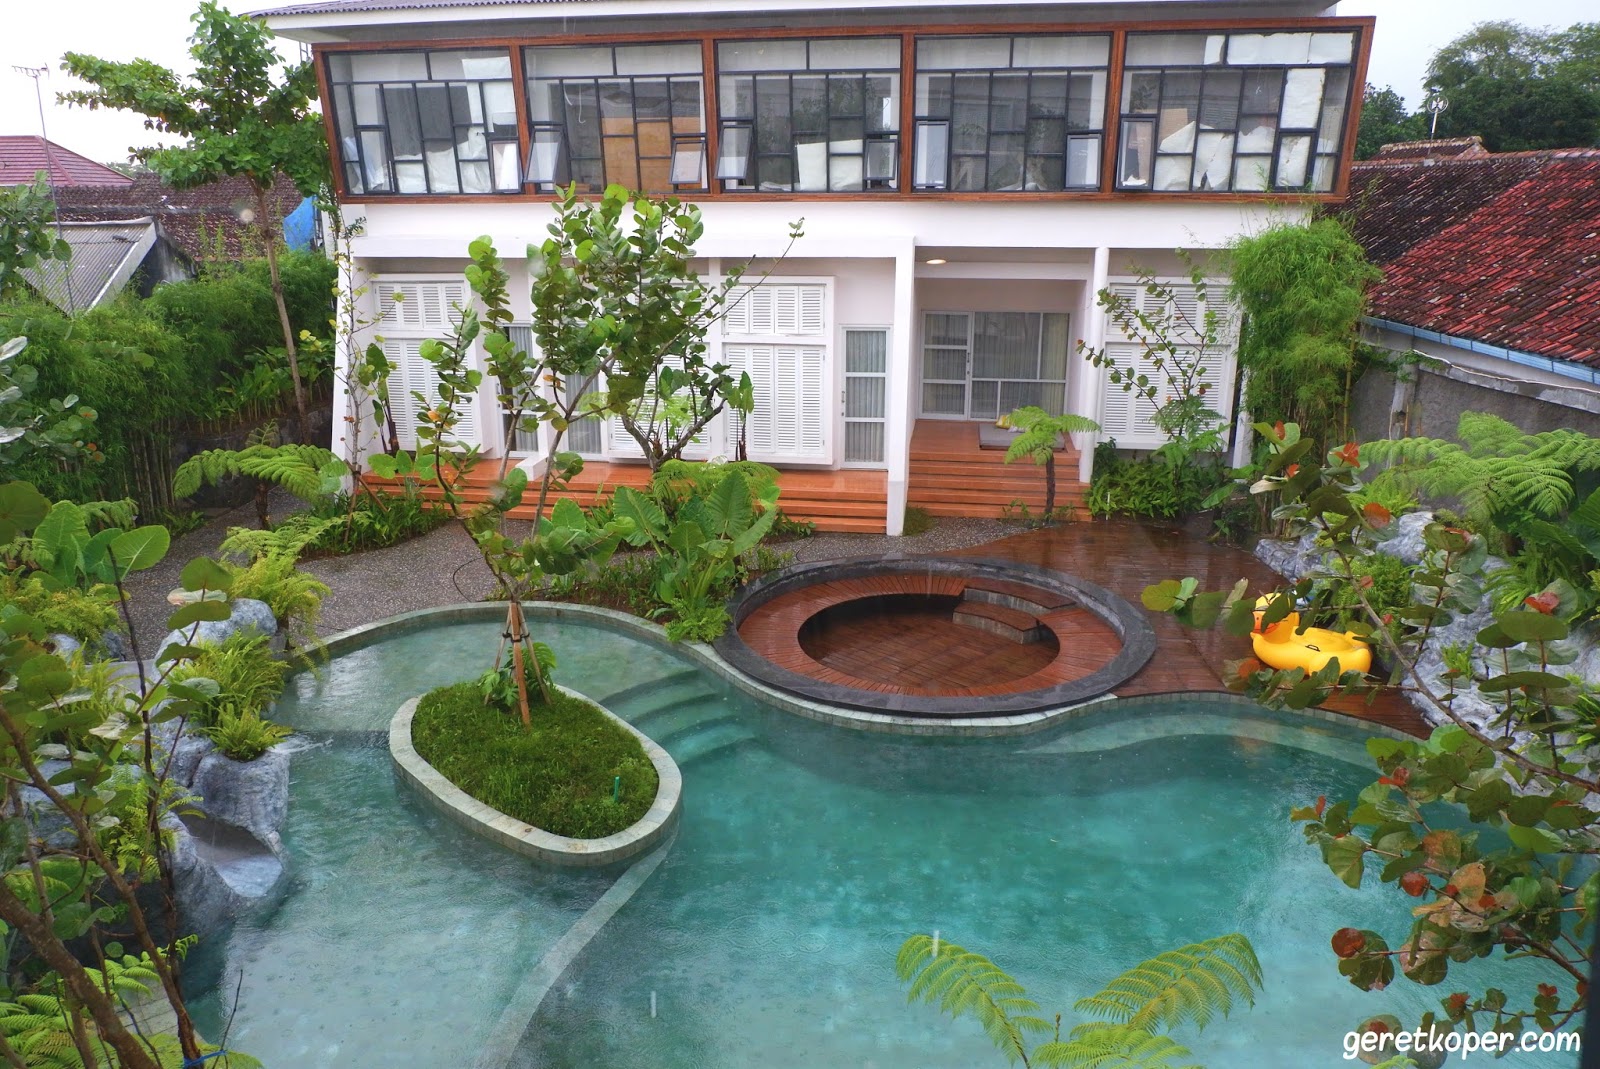 Review Yats Colony: Hotel Paling Reccomended di Jogja 